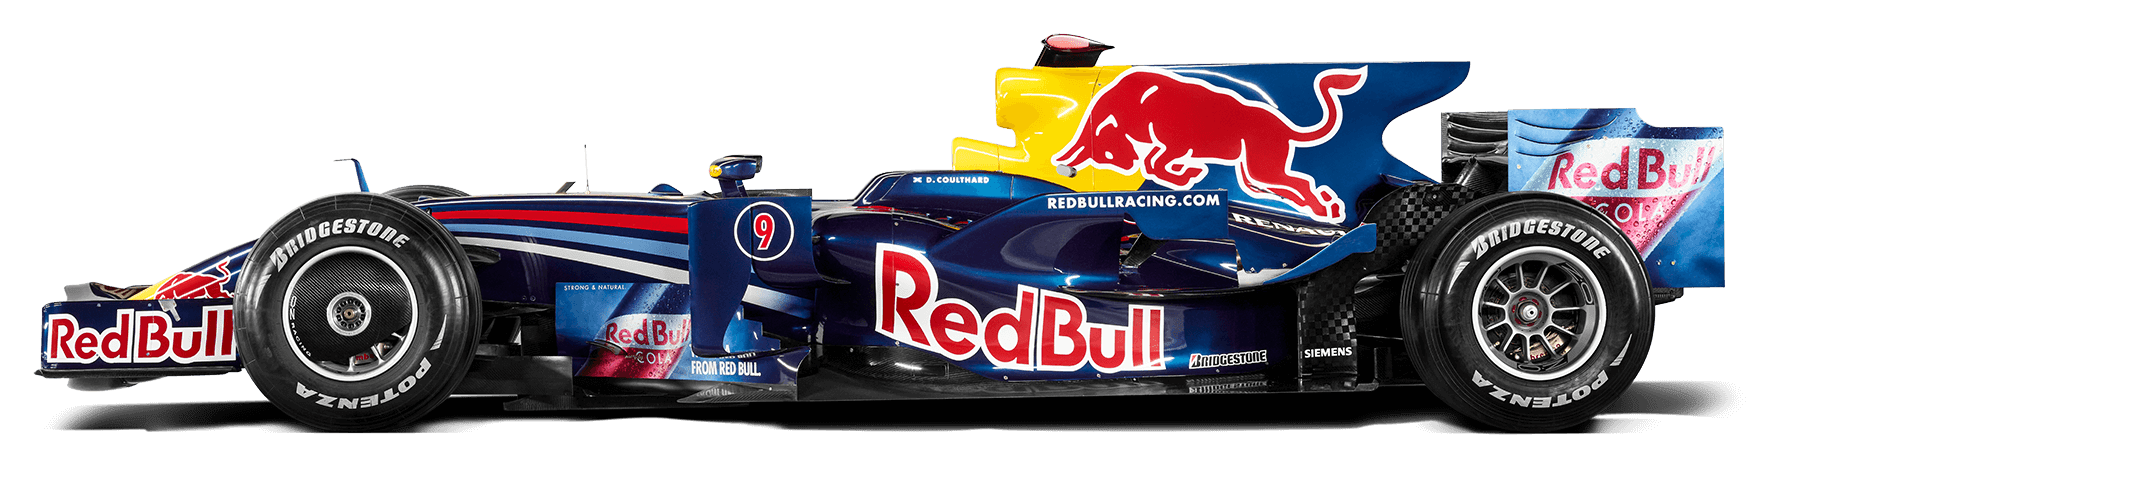 Red Bull RB4 - Wikipedia